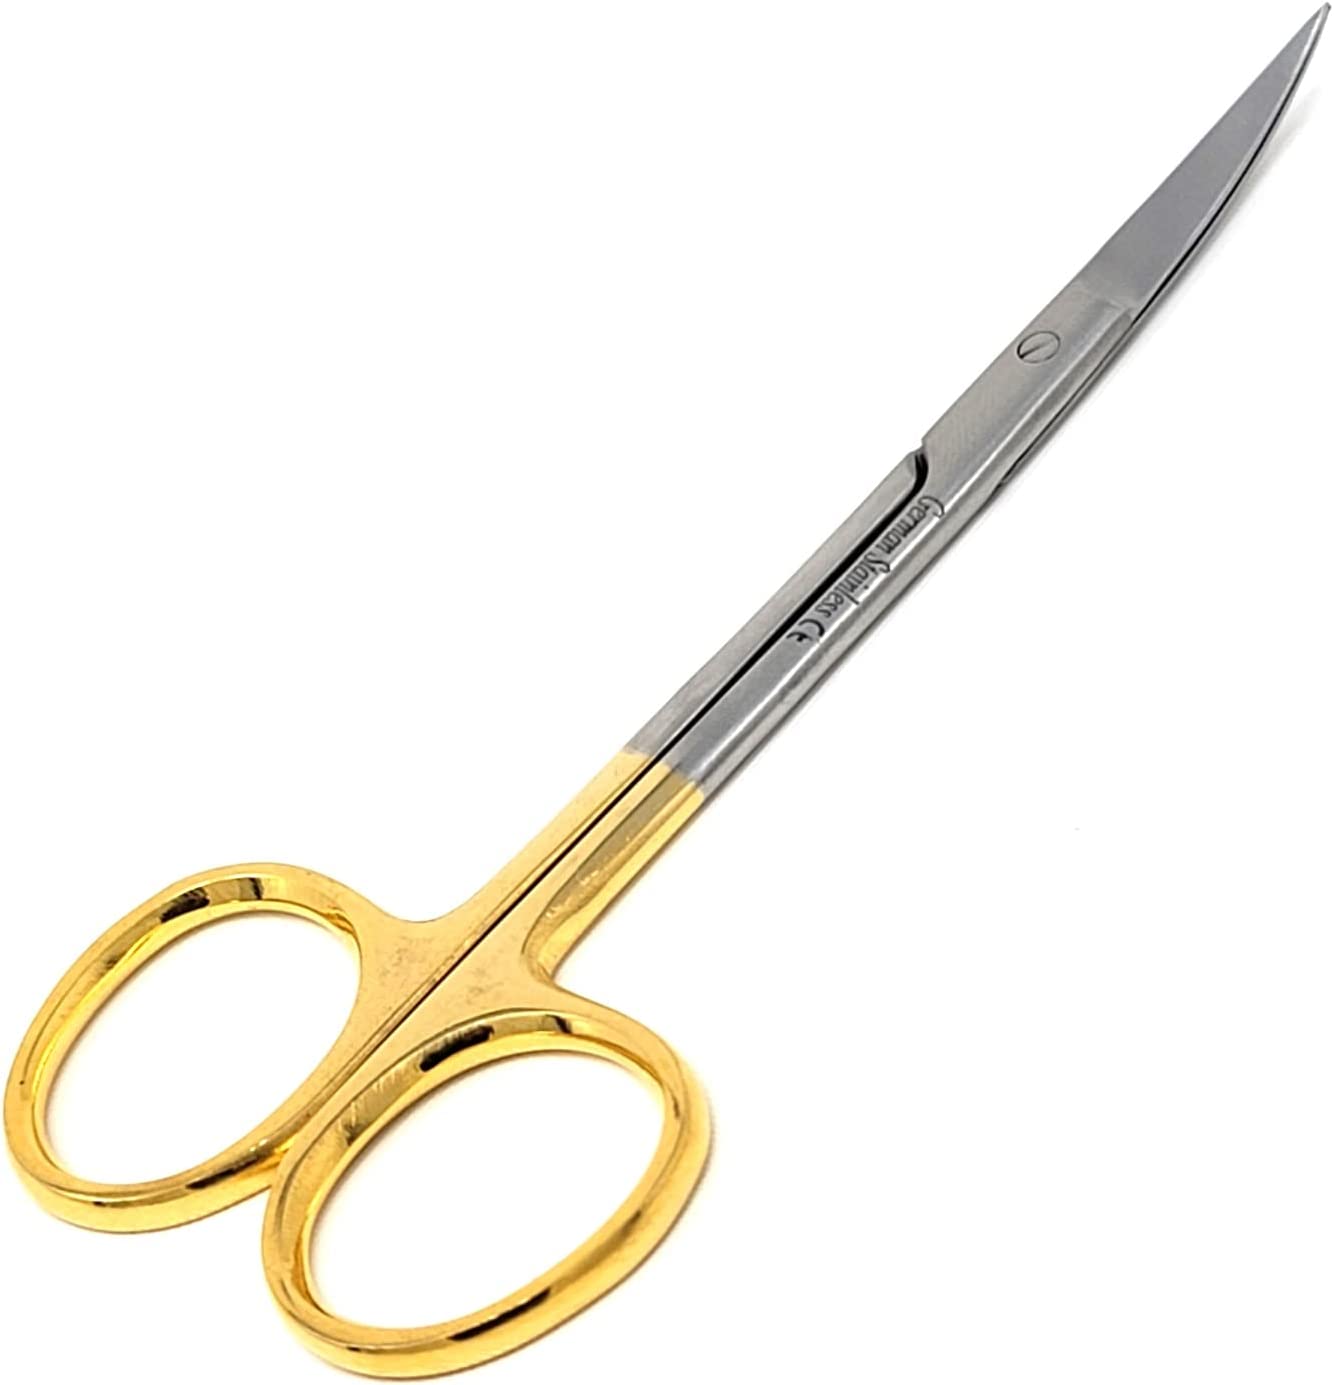 LAJA IMPORTS FINE POINT CURVED TIP NAIL SCISSORS STAINLESS STEEL (HALF GOLD)